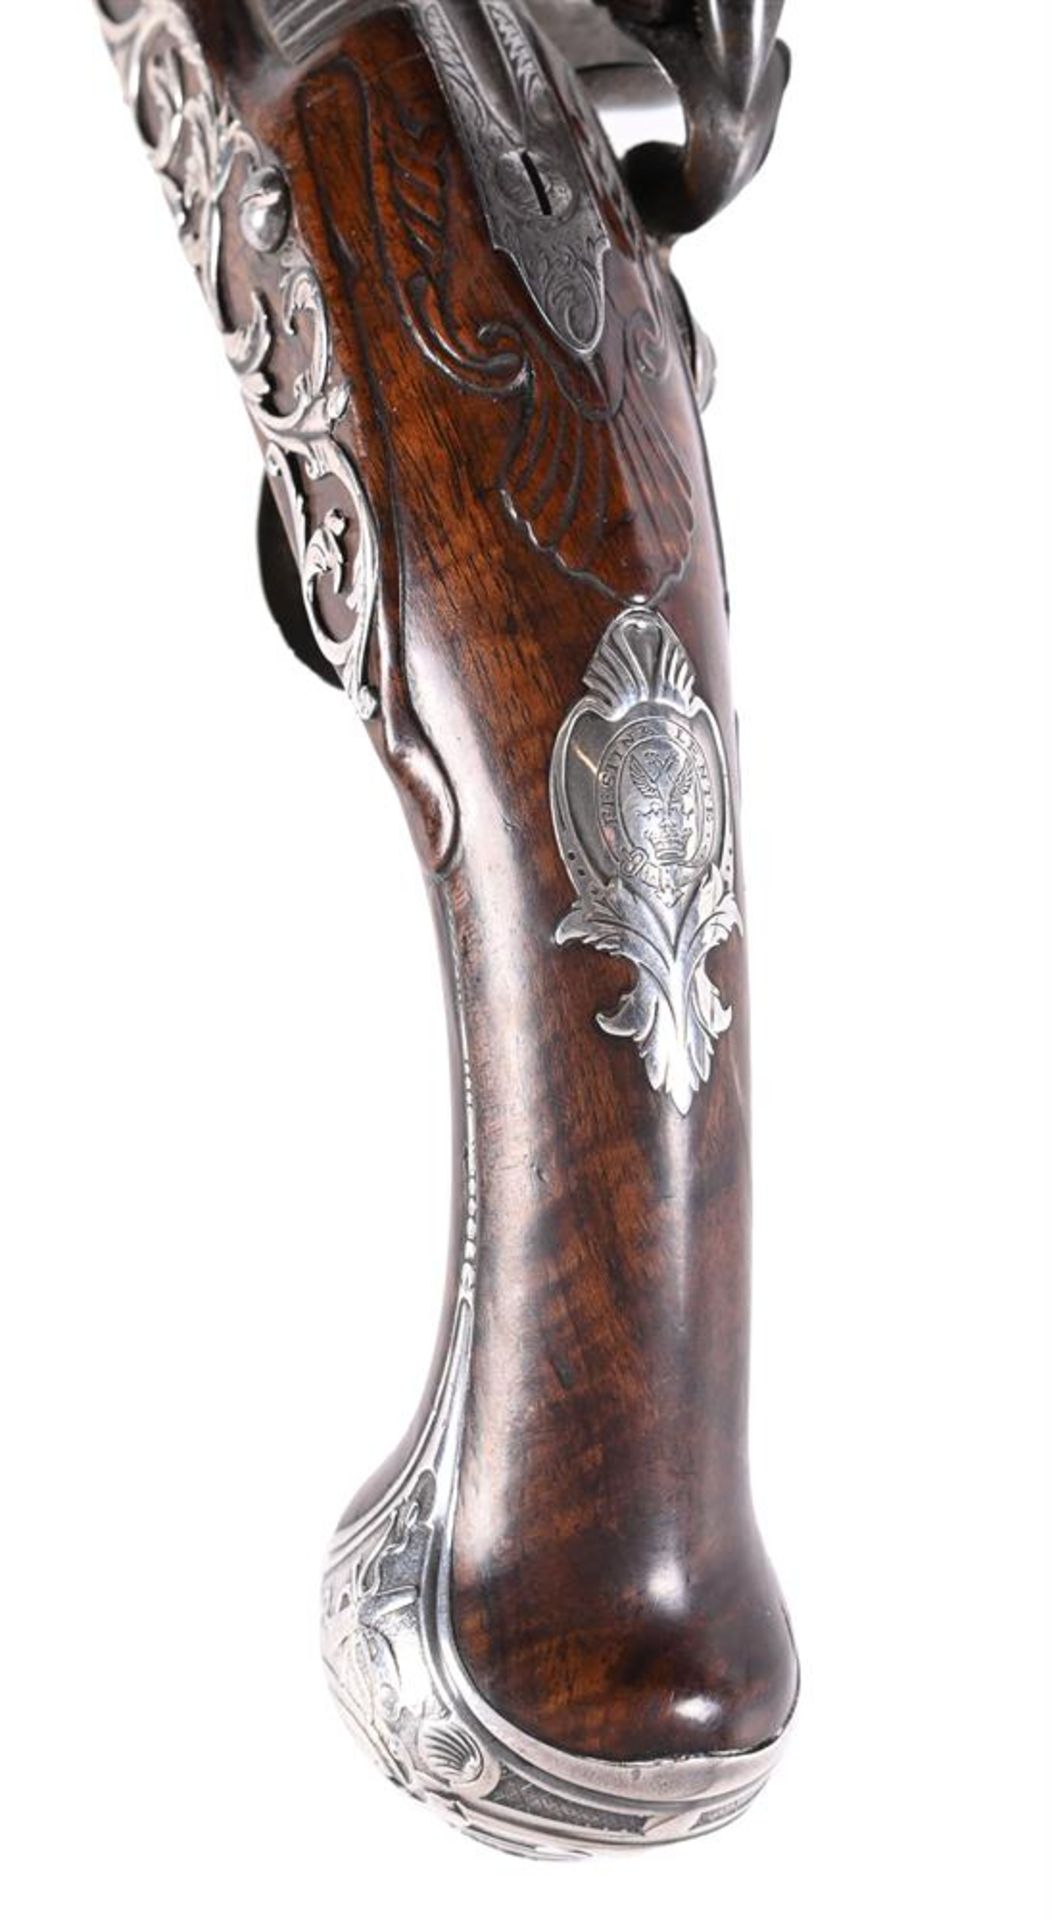 BENNETT LONDON; A PAIR OF WALNUT AND SILVER-METAL MOUNTED HOLSTER PISTOLS - Image 7 of 8